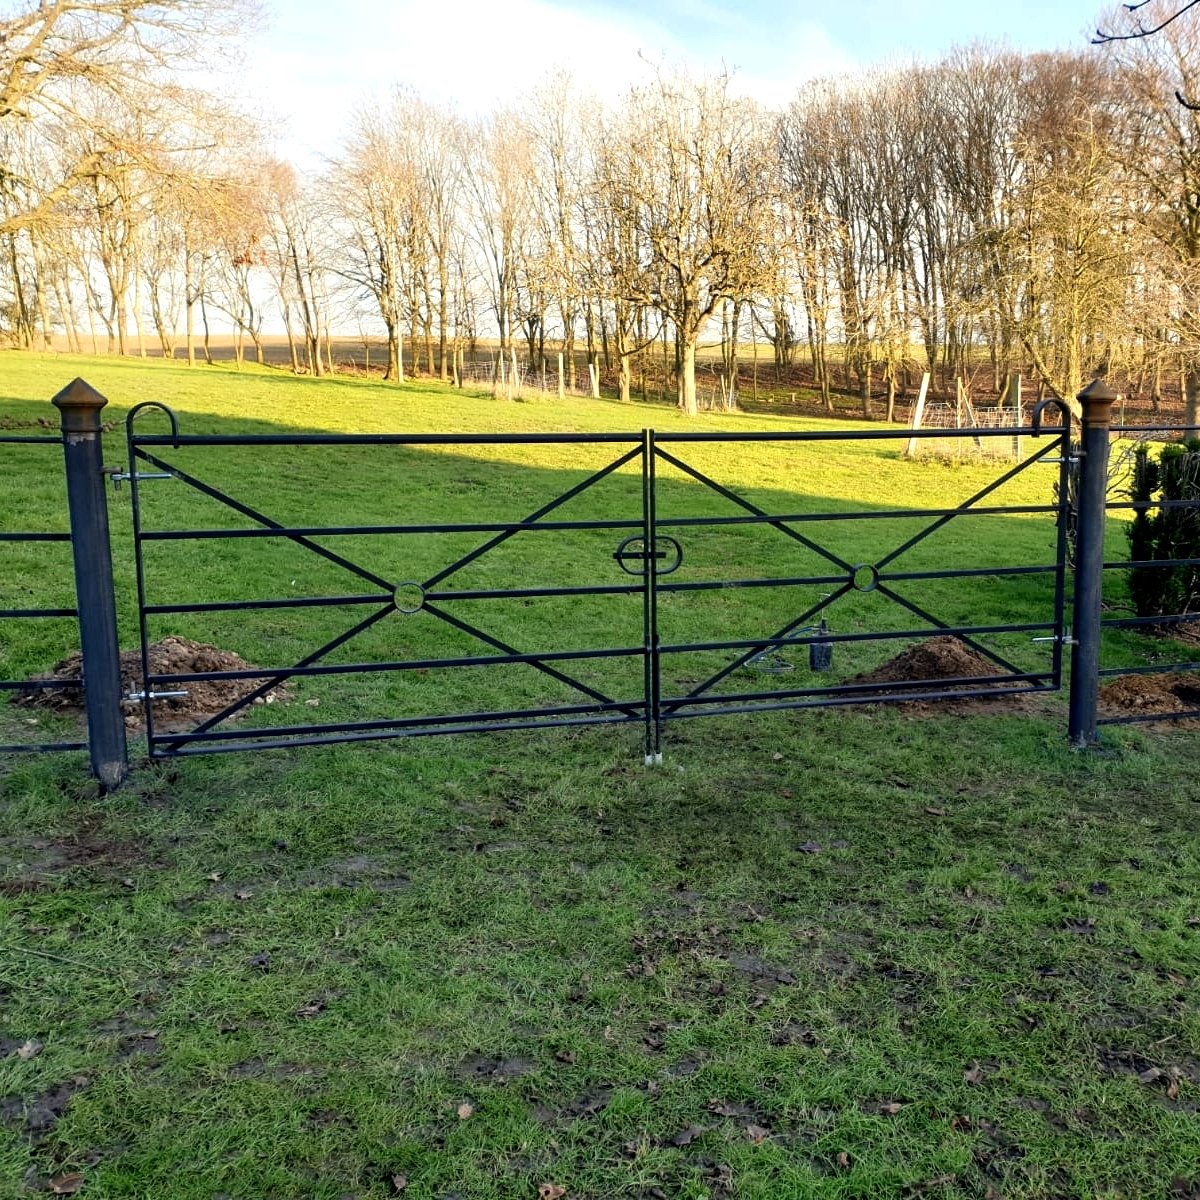 This Metal Field Gate was installed this week in Essex. Welded in place the next step is for it to be primed and painted. 

#wintersday
#fieldgate
#gate
#metalgate
#gatesofinsta
#thetraditionalco